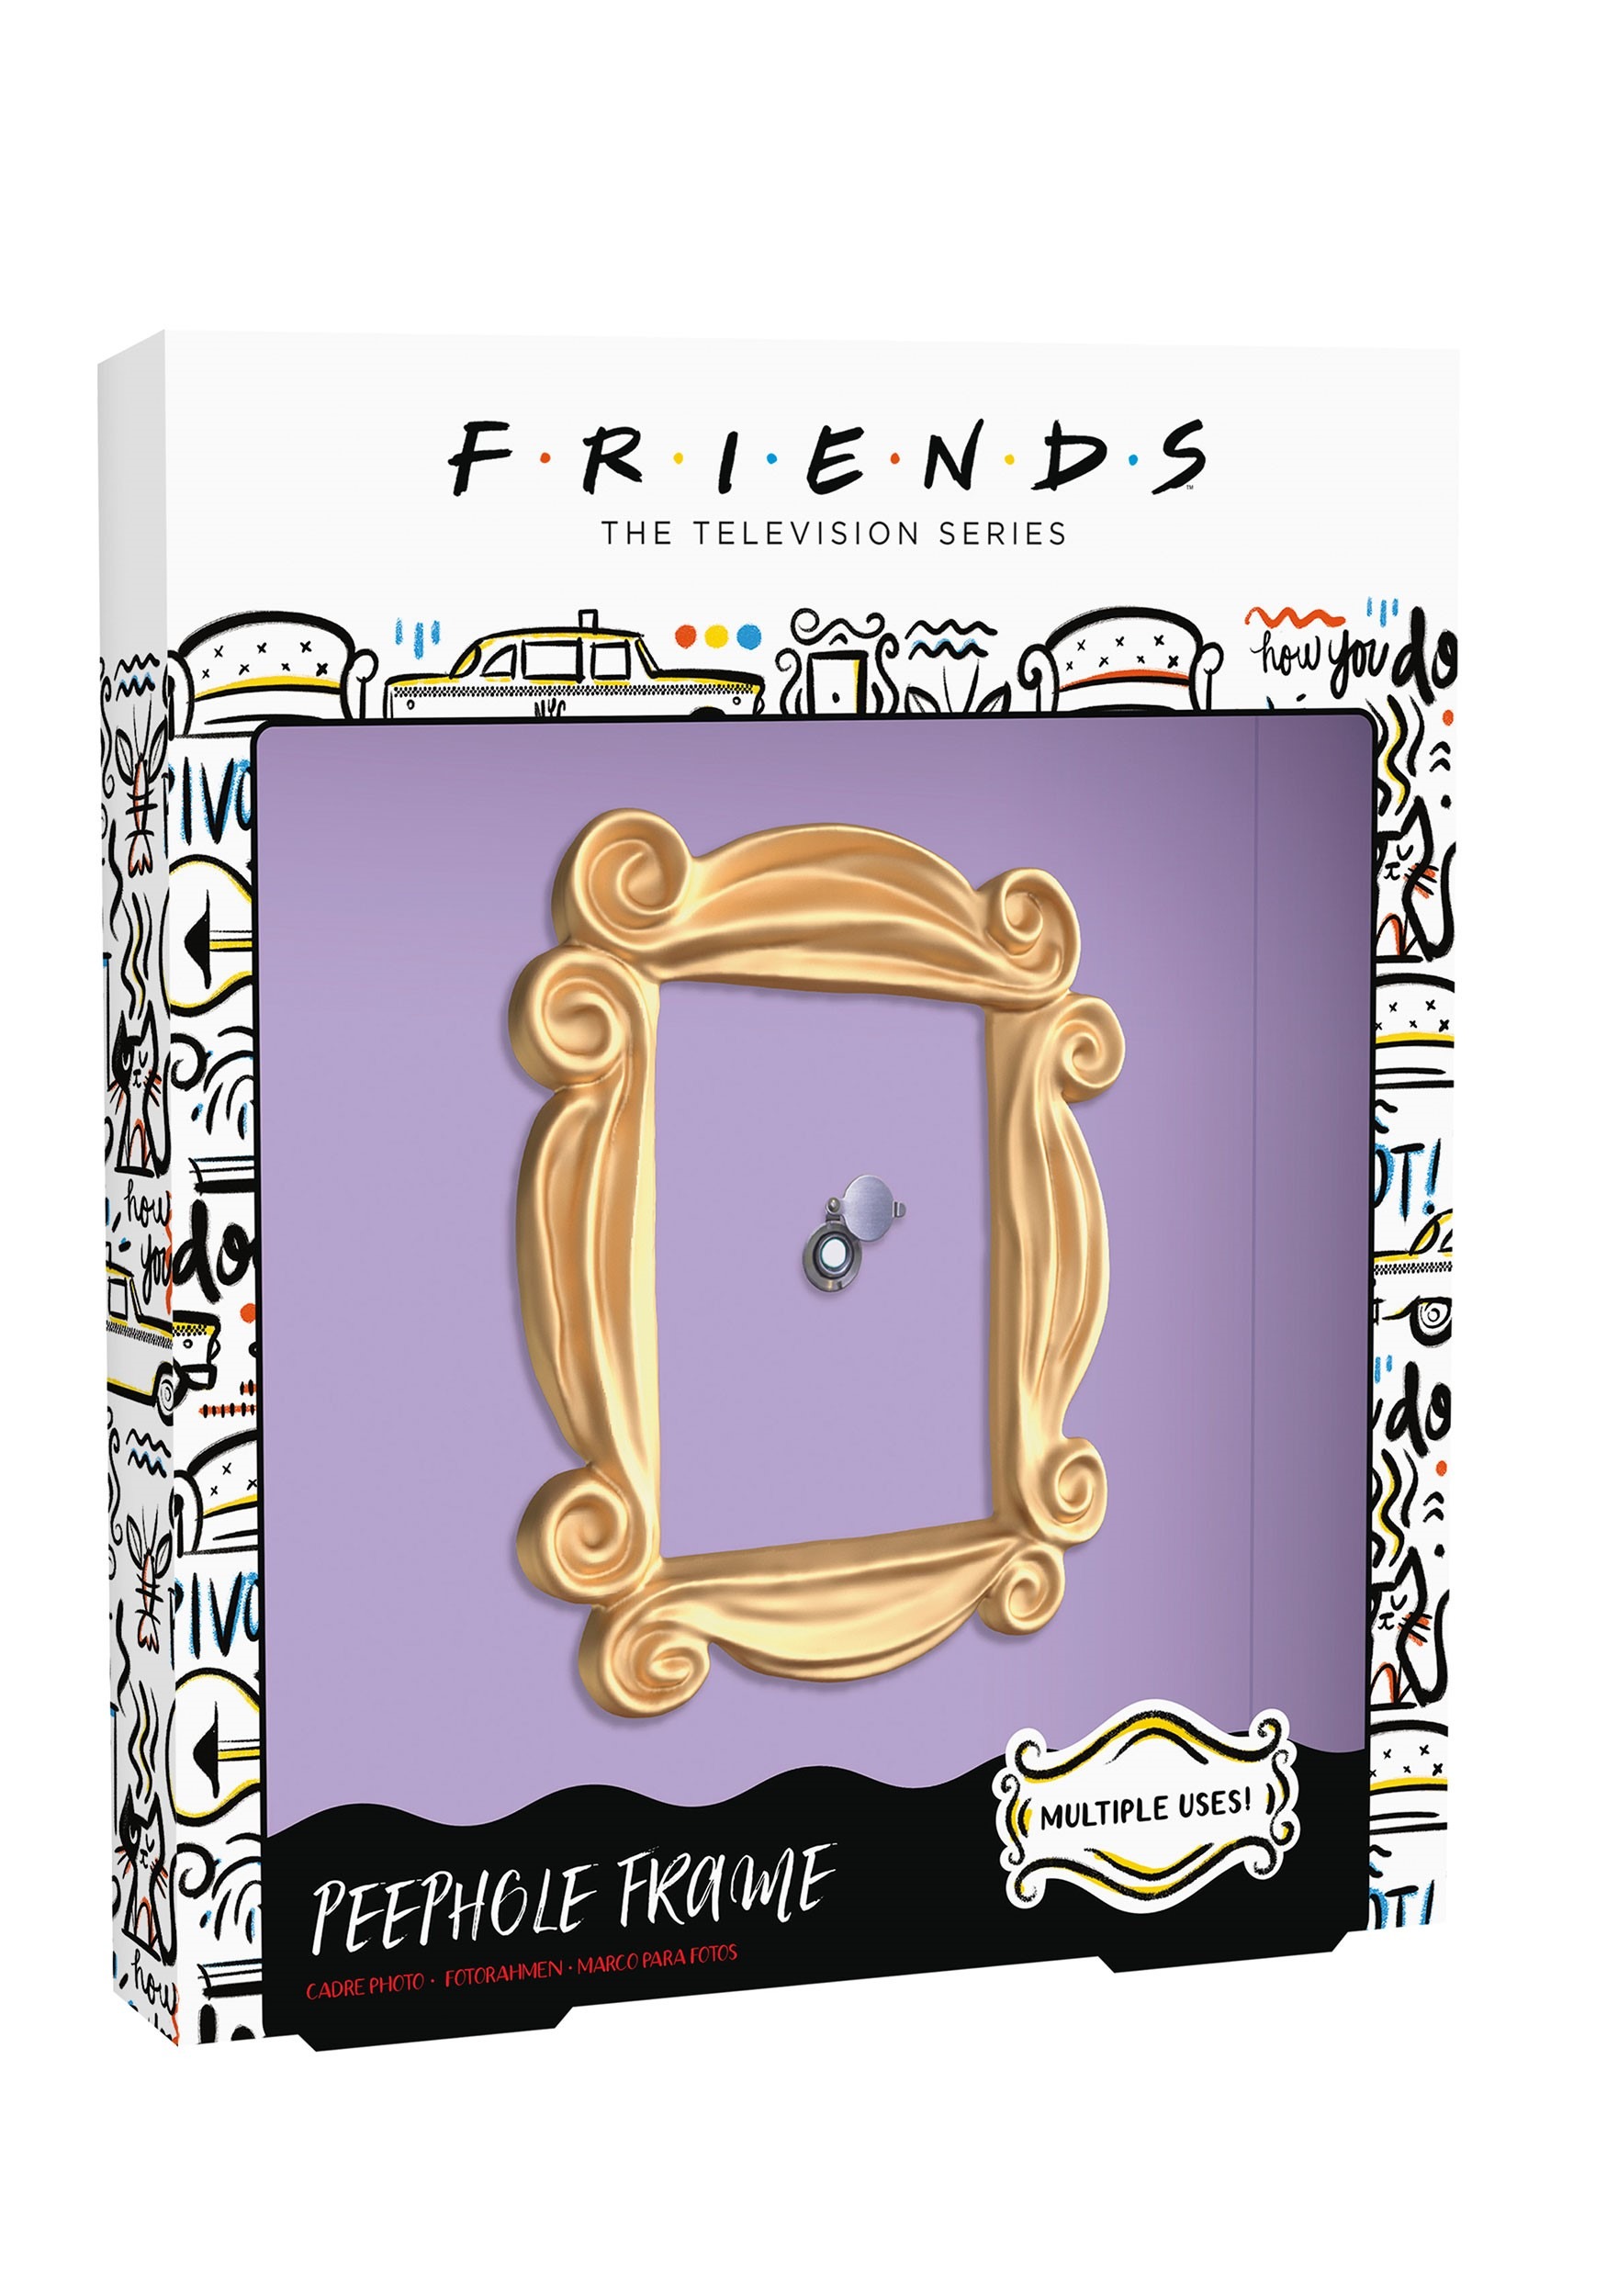 Peephole Frame from Friends